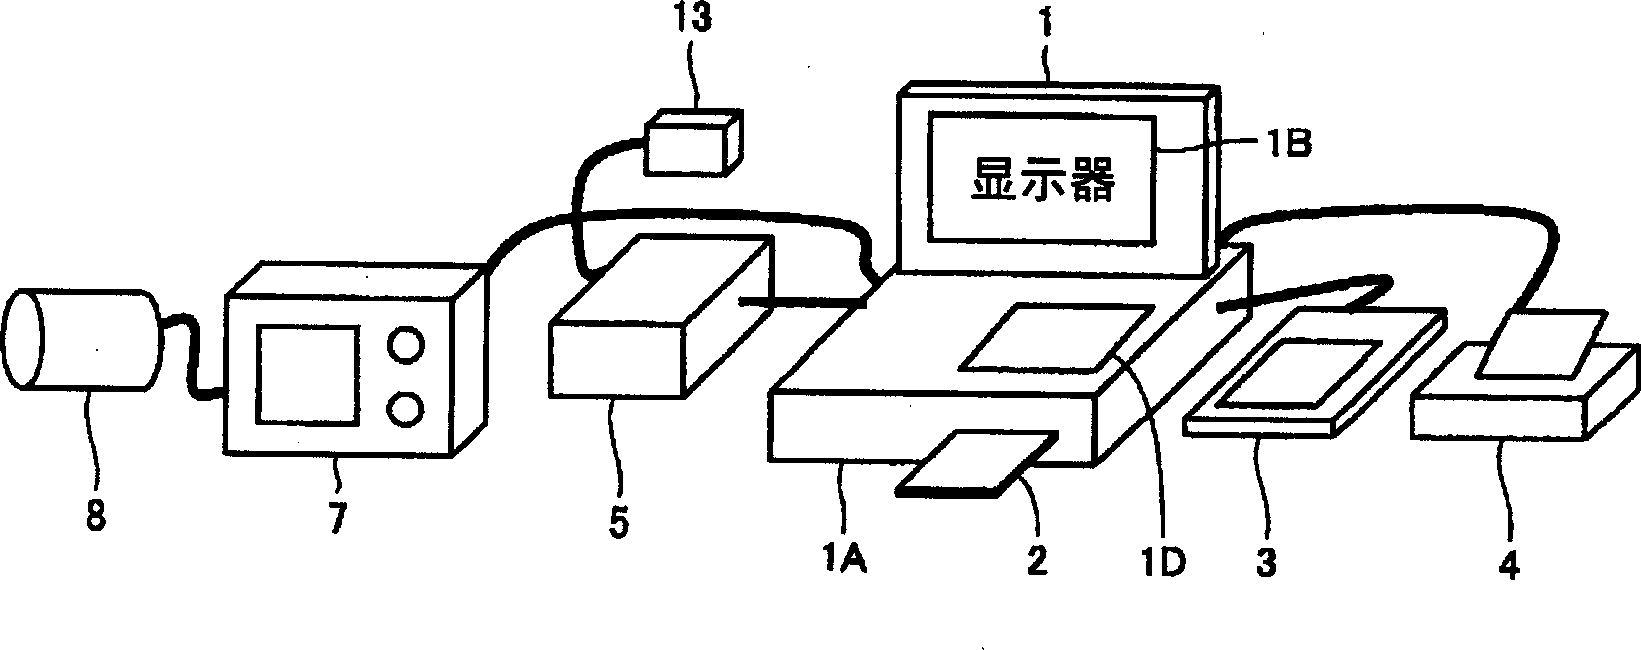 Pulse wave monitoring device